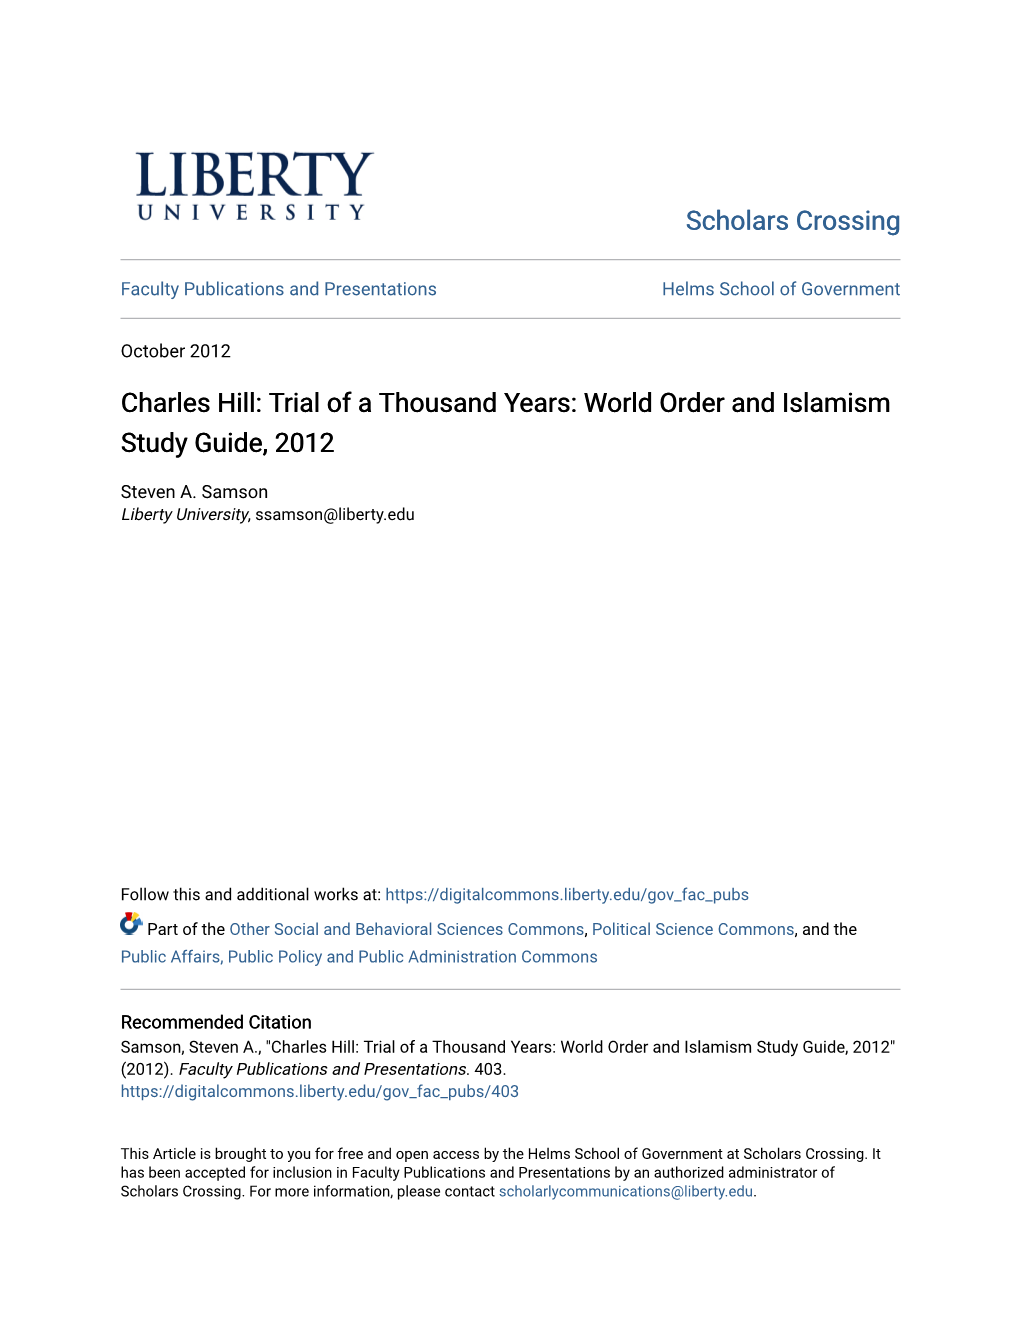 Charles Hill: Trial of a Thousand Years: World Order and Islamism Study Guide, 2012